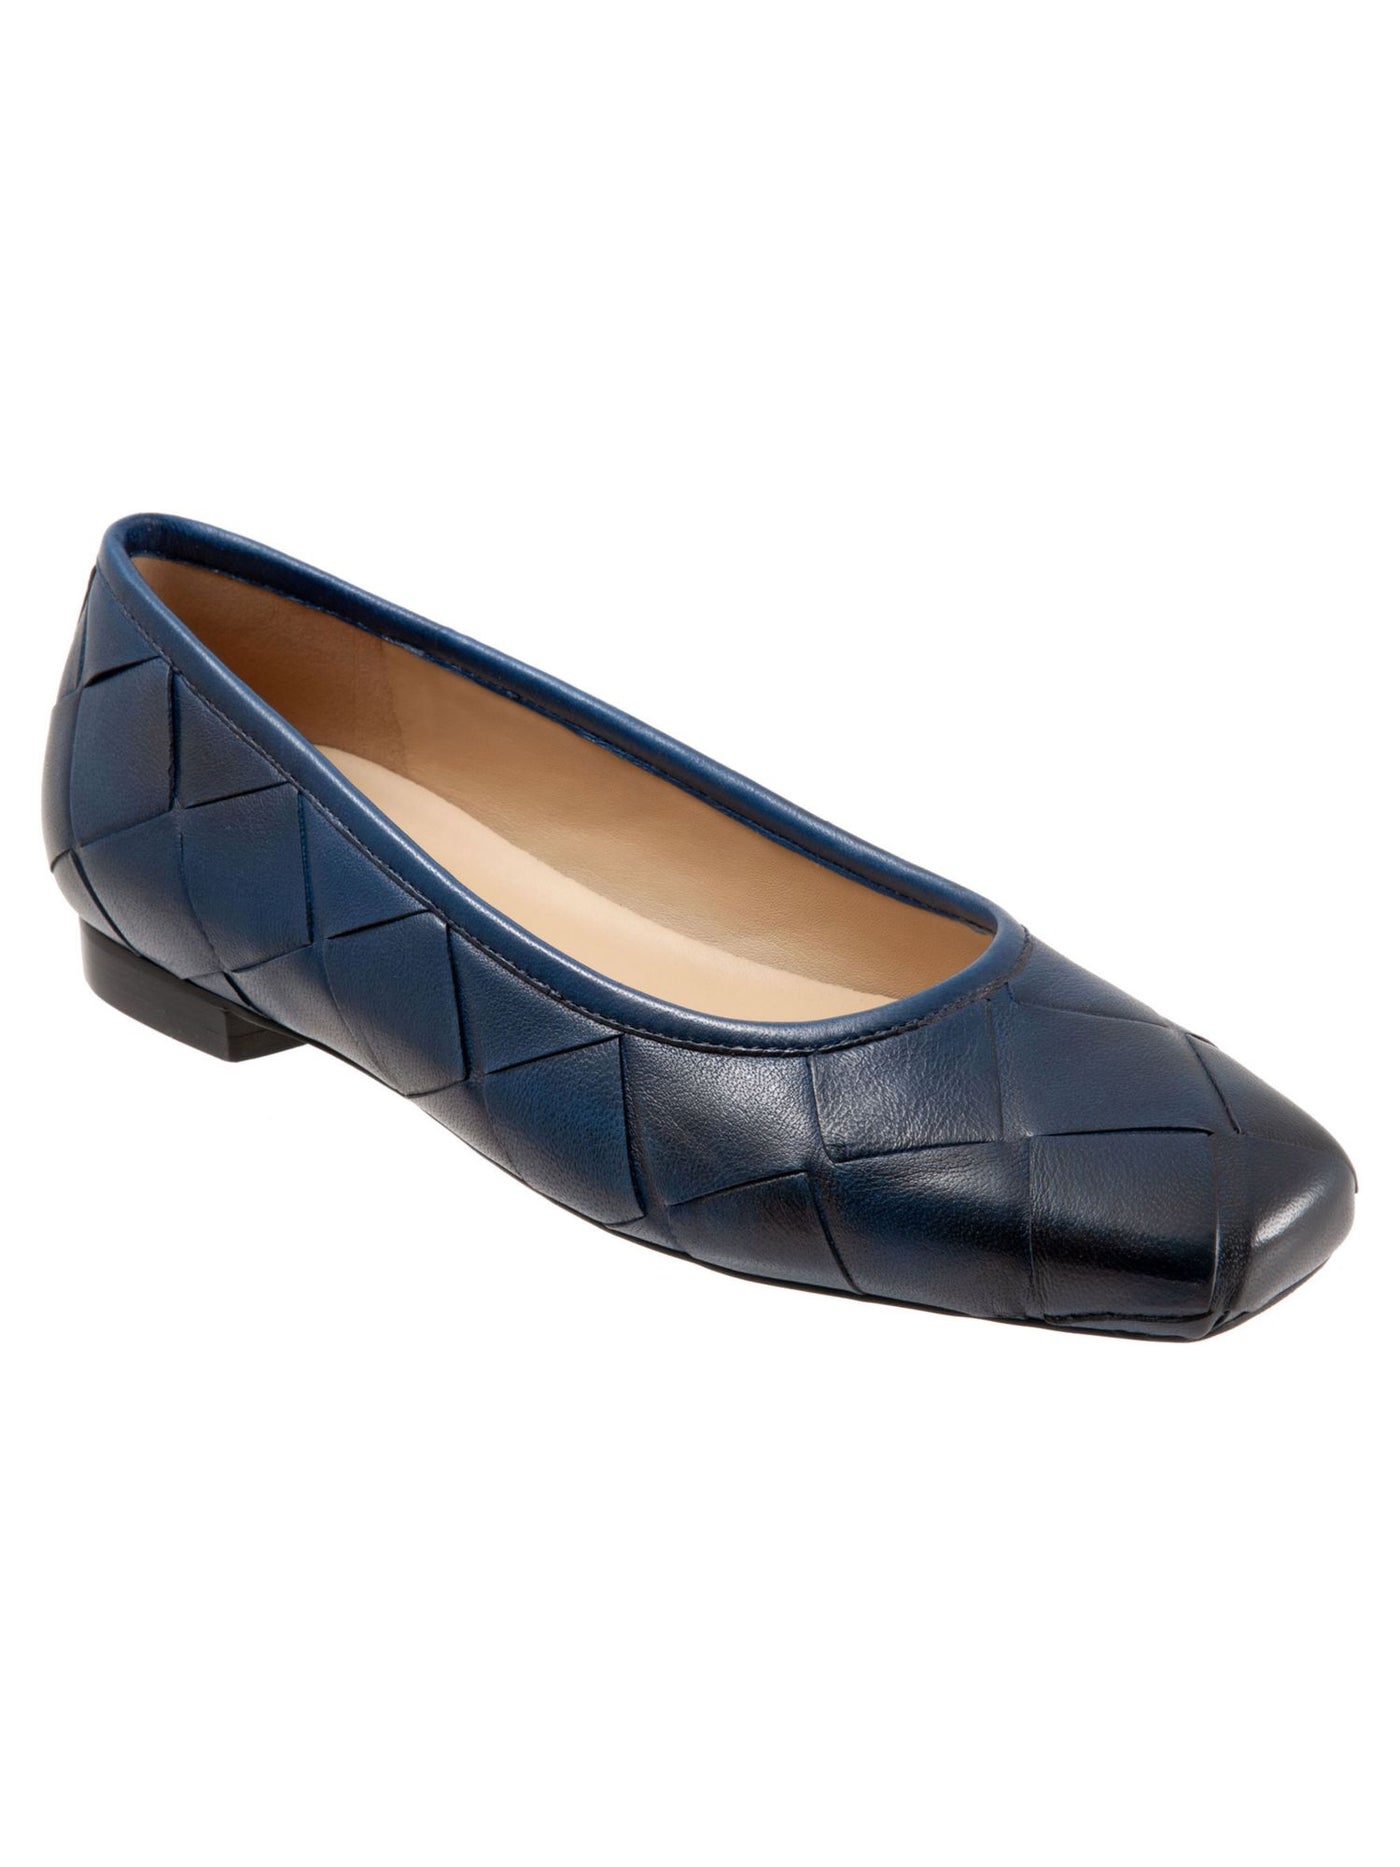 TROTTERS Womens Navy Cushioned Quilted Hanny Round Toe Slip On Leather Flats Shoes 8 M